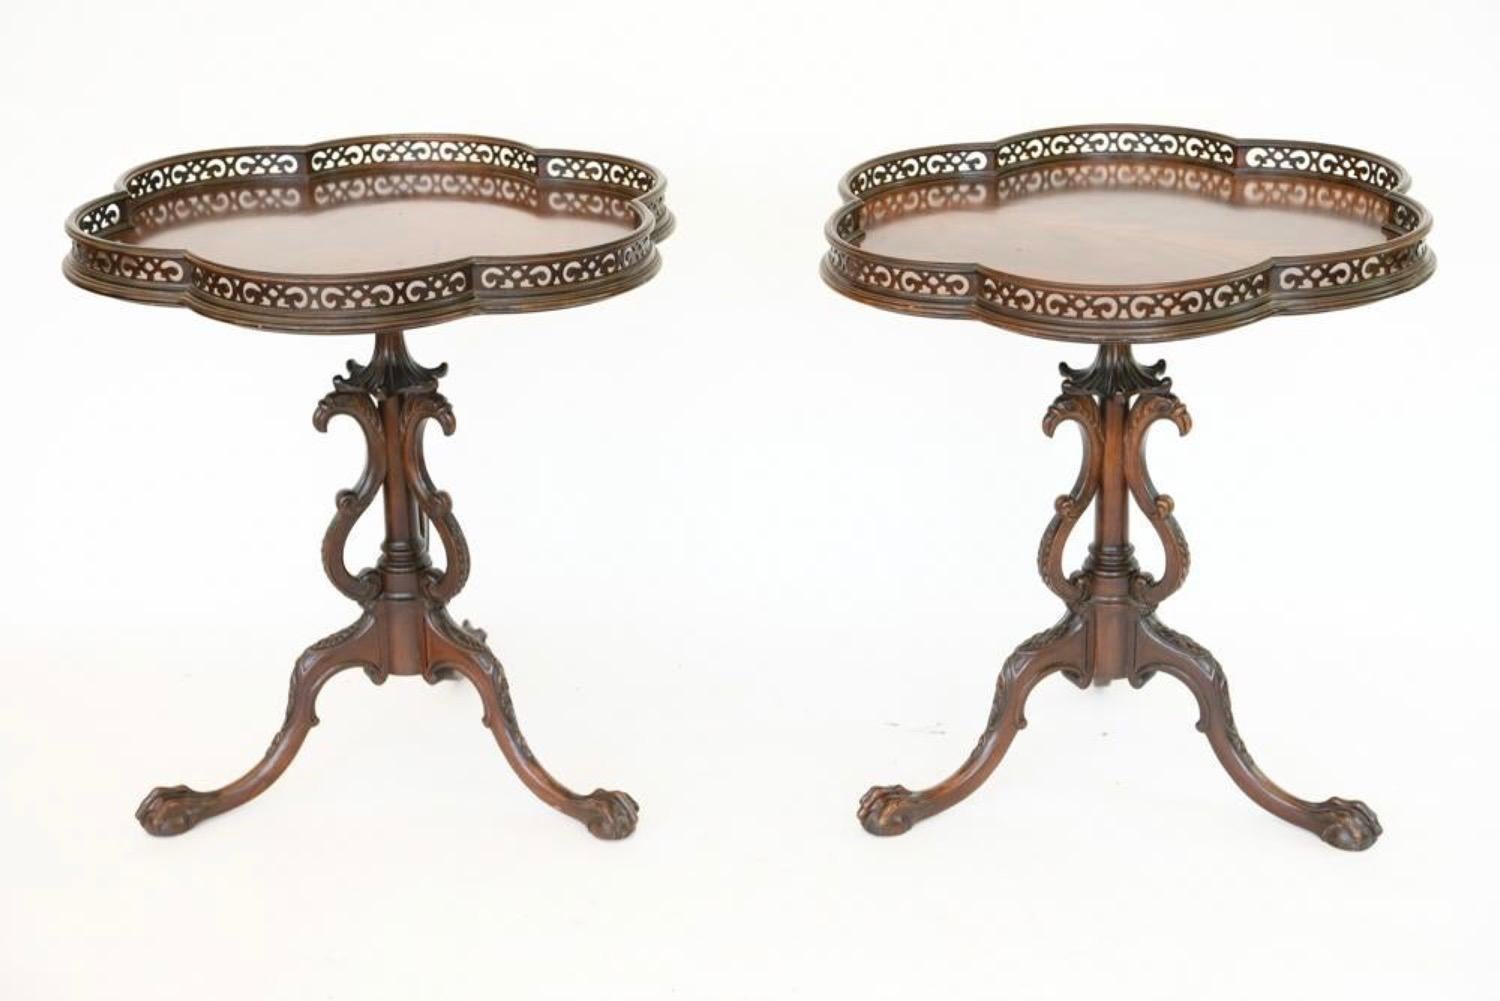 Elegant and stylish, these scalloped or pie shaped gallery top occasional end tables with wonderfully elaborately carved center support are made by Grand Rapids Furniture Company with label underneath.
In 1902, furniture companies in Grand Rapids